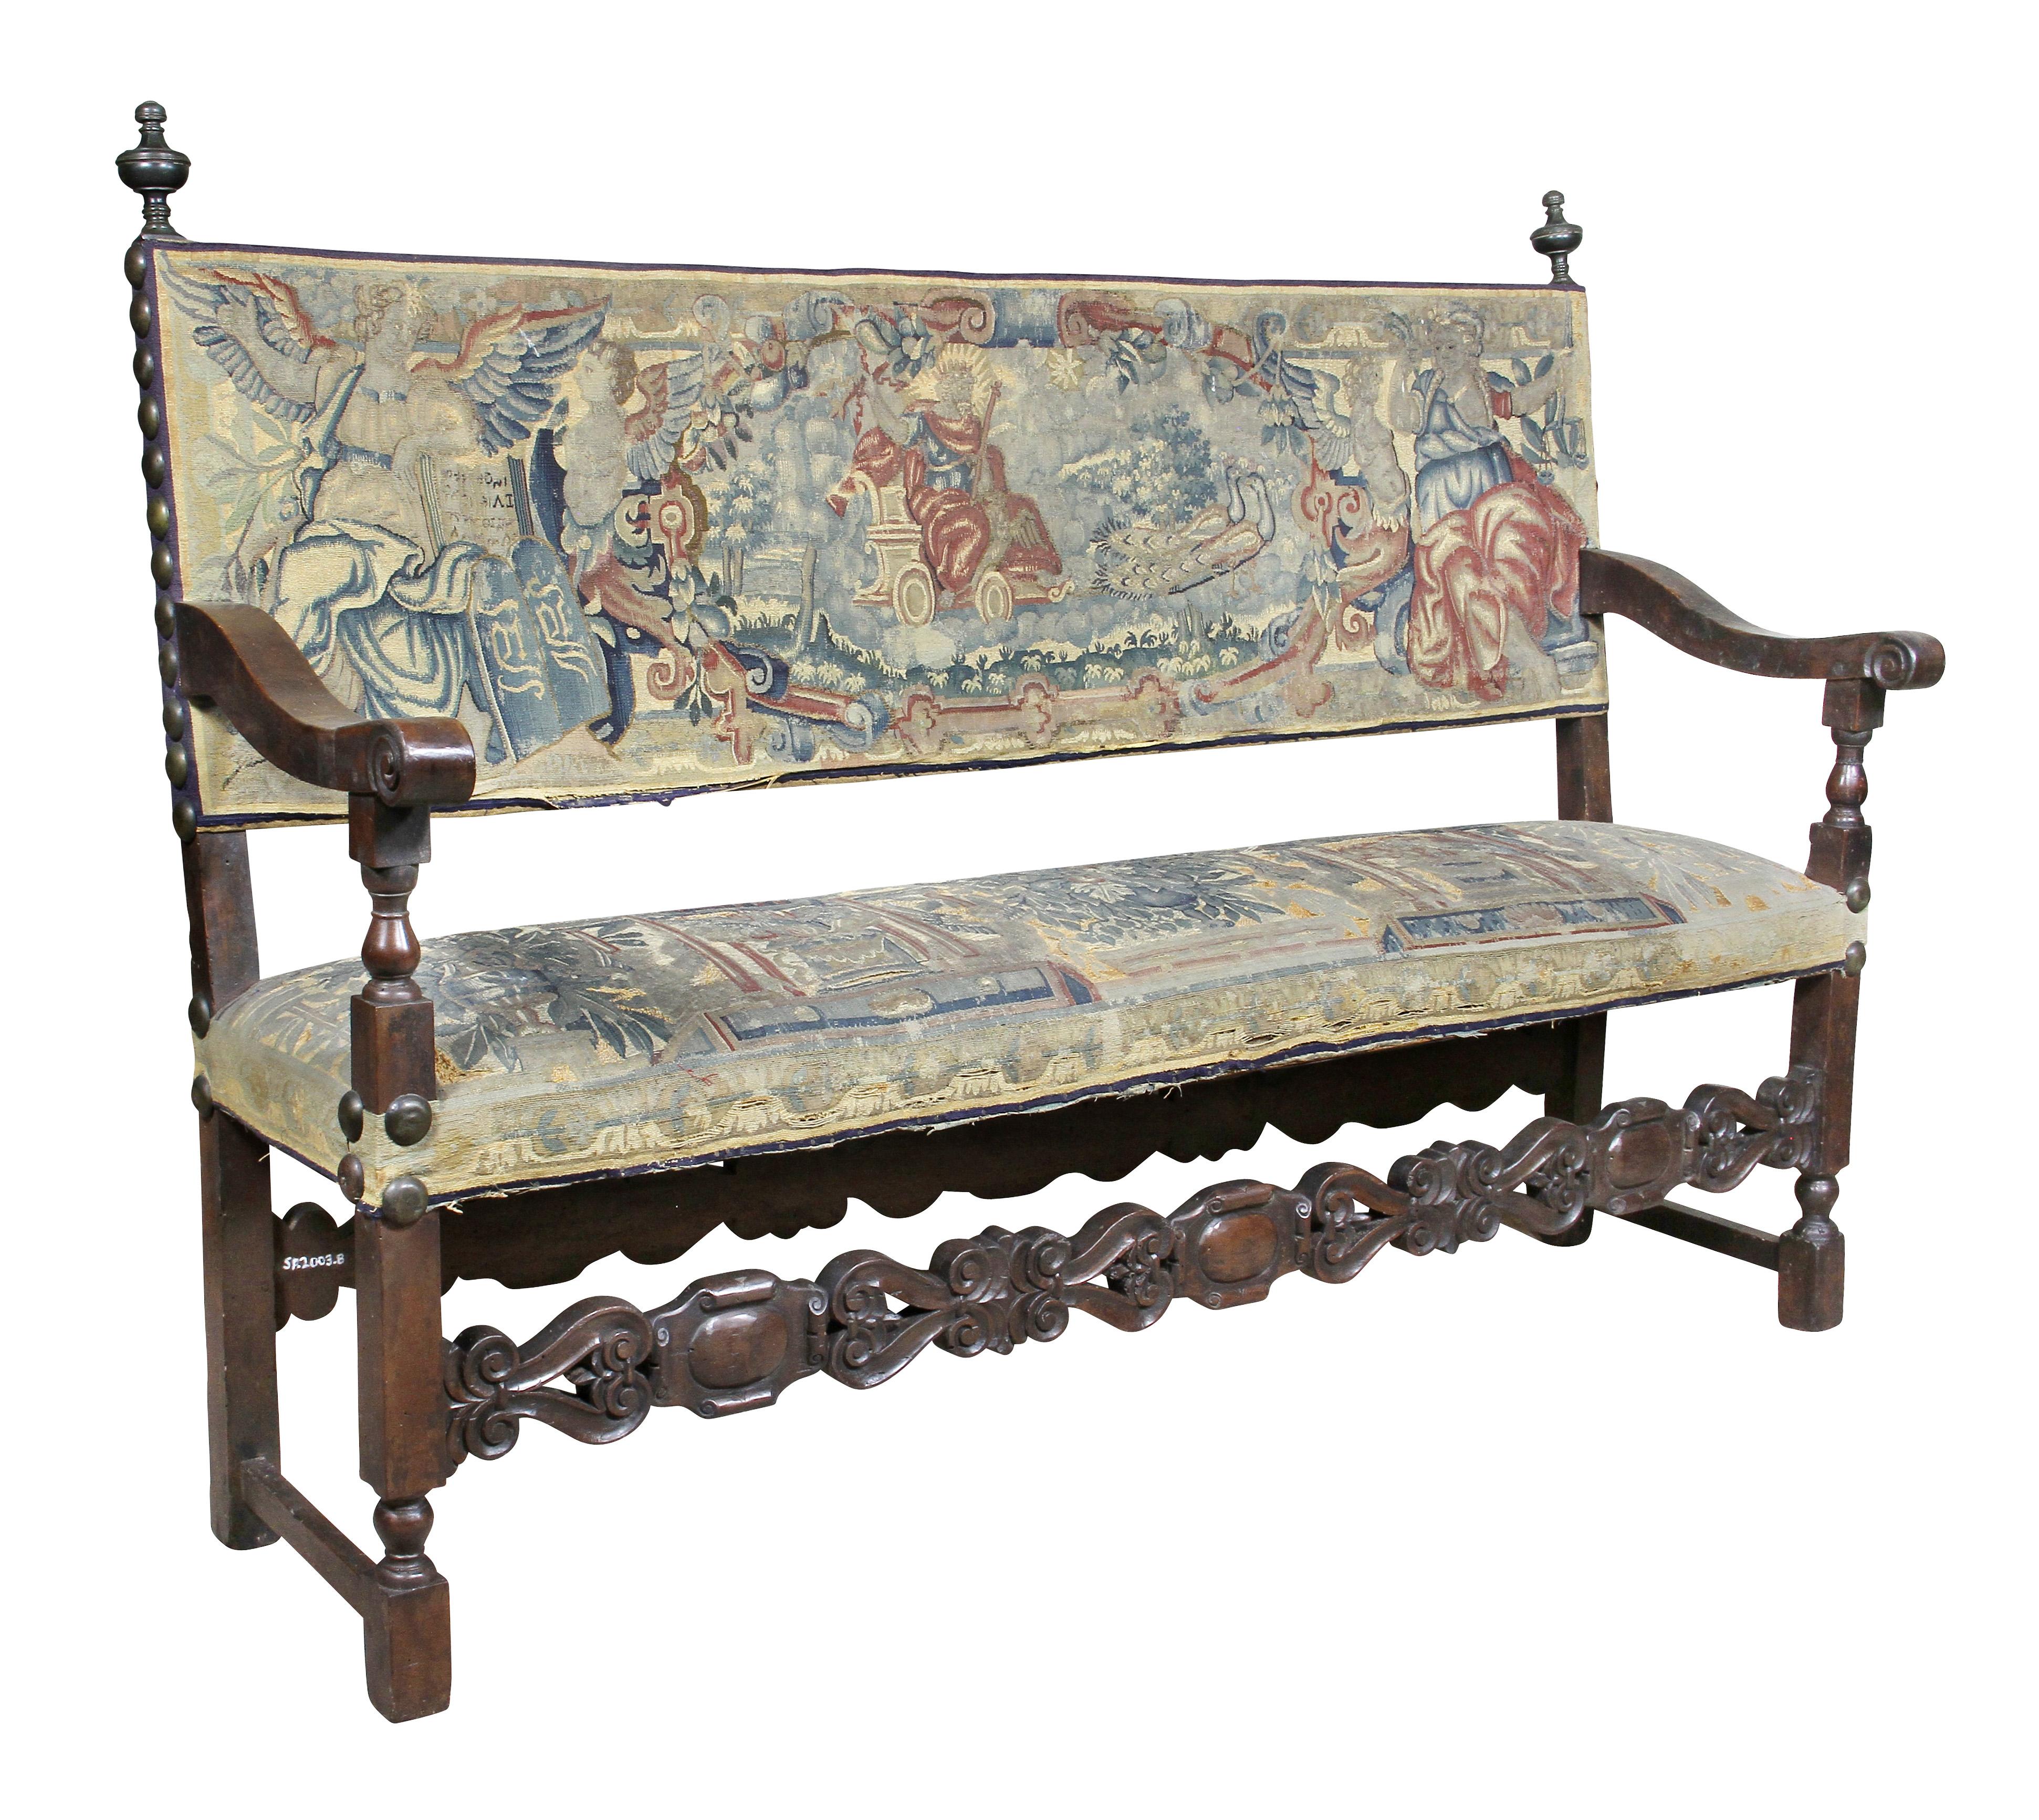 With rectangular back with bronze finials, arms with carved hand holds and supported on turned supports, rectangular seat raised on square section legs joined by a carved stretcher. Upholstered in early 18th century Flemish tapestry. Provenance,